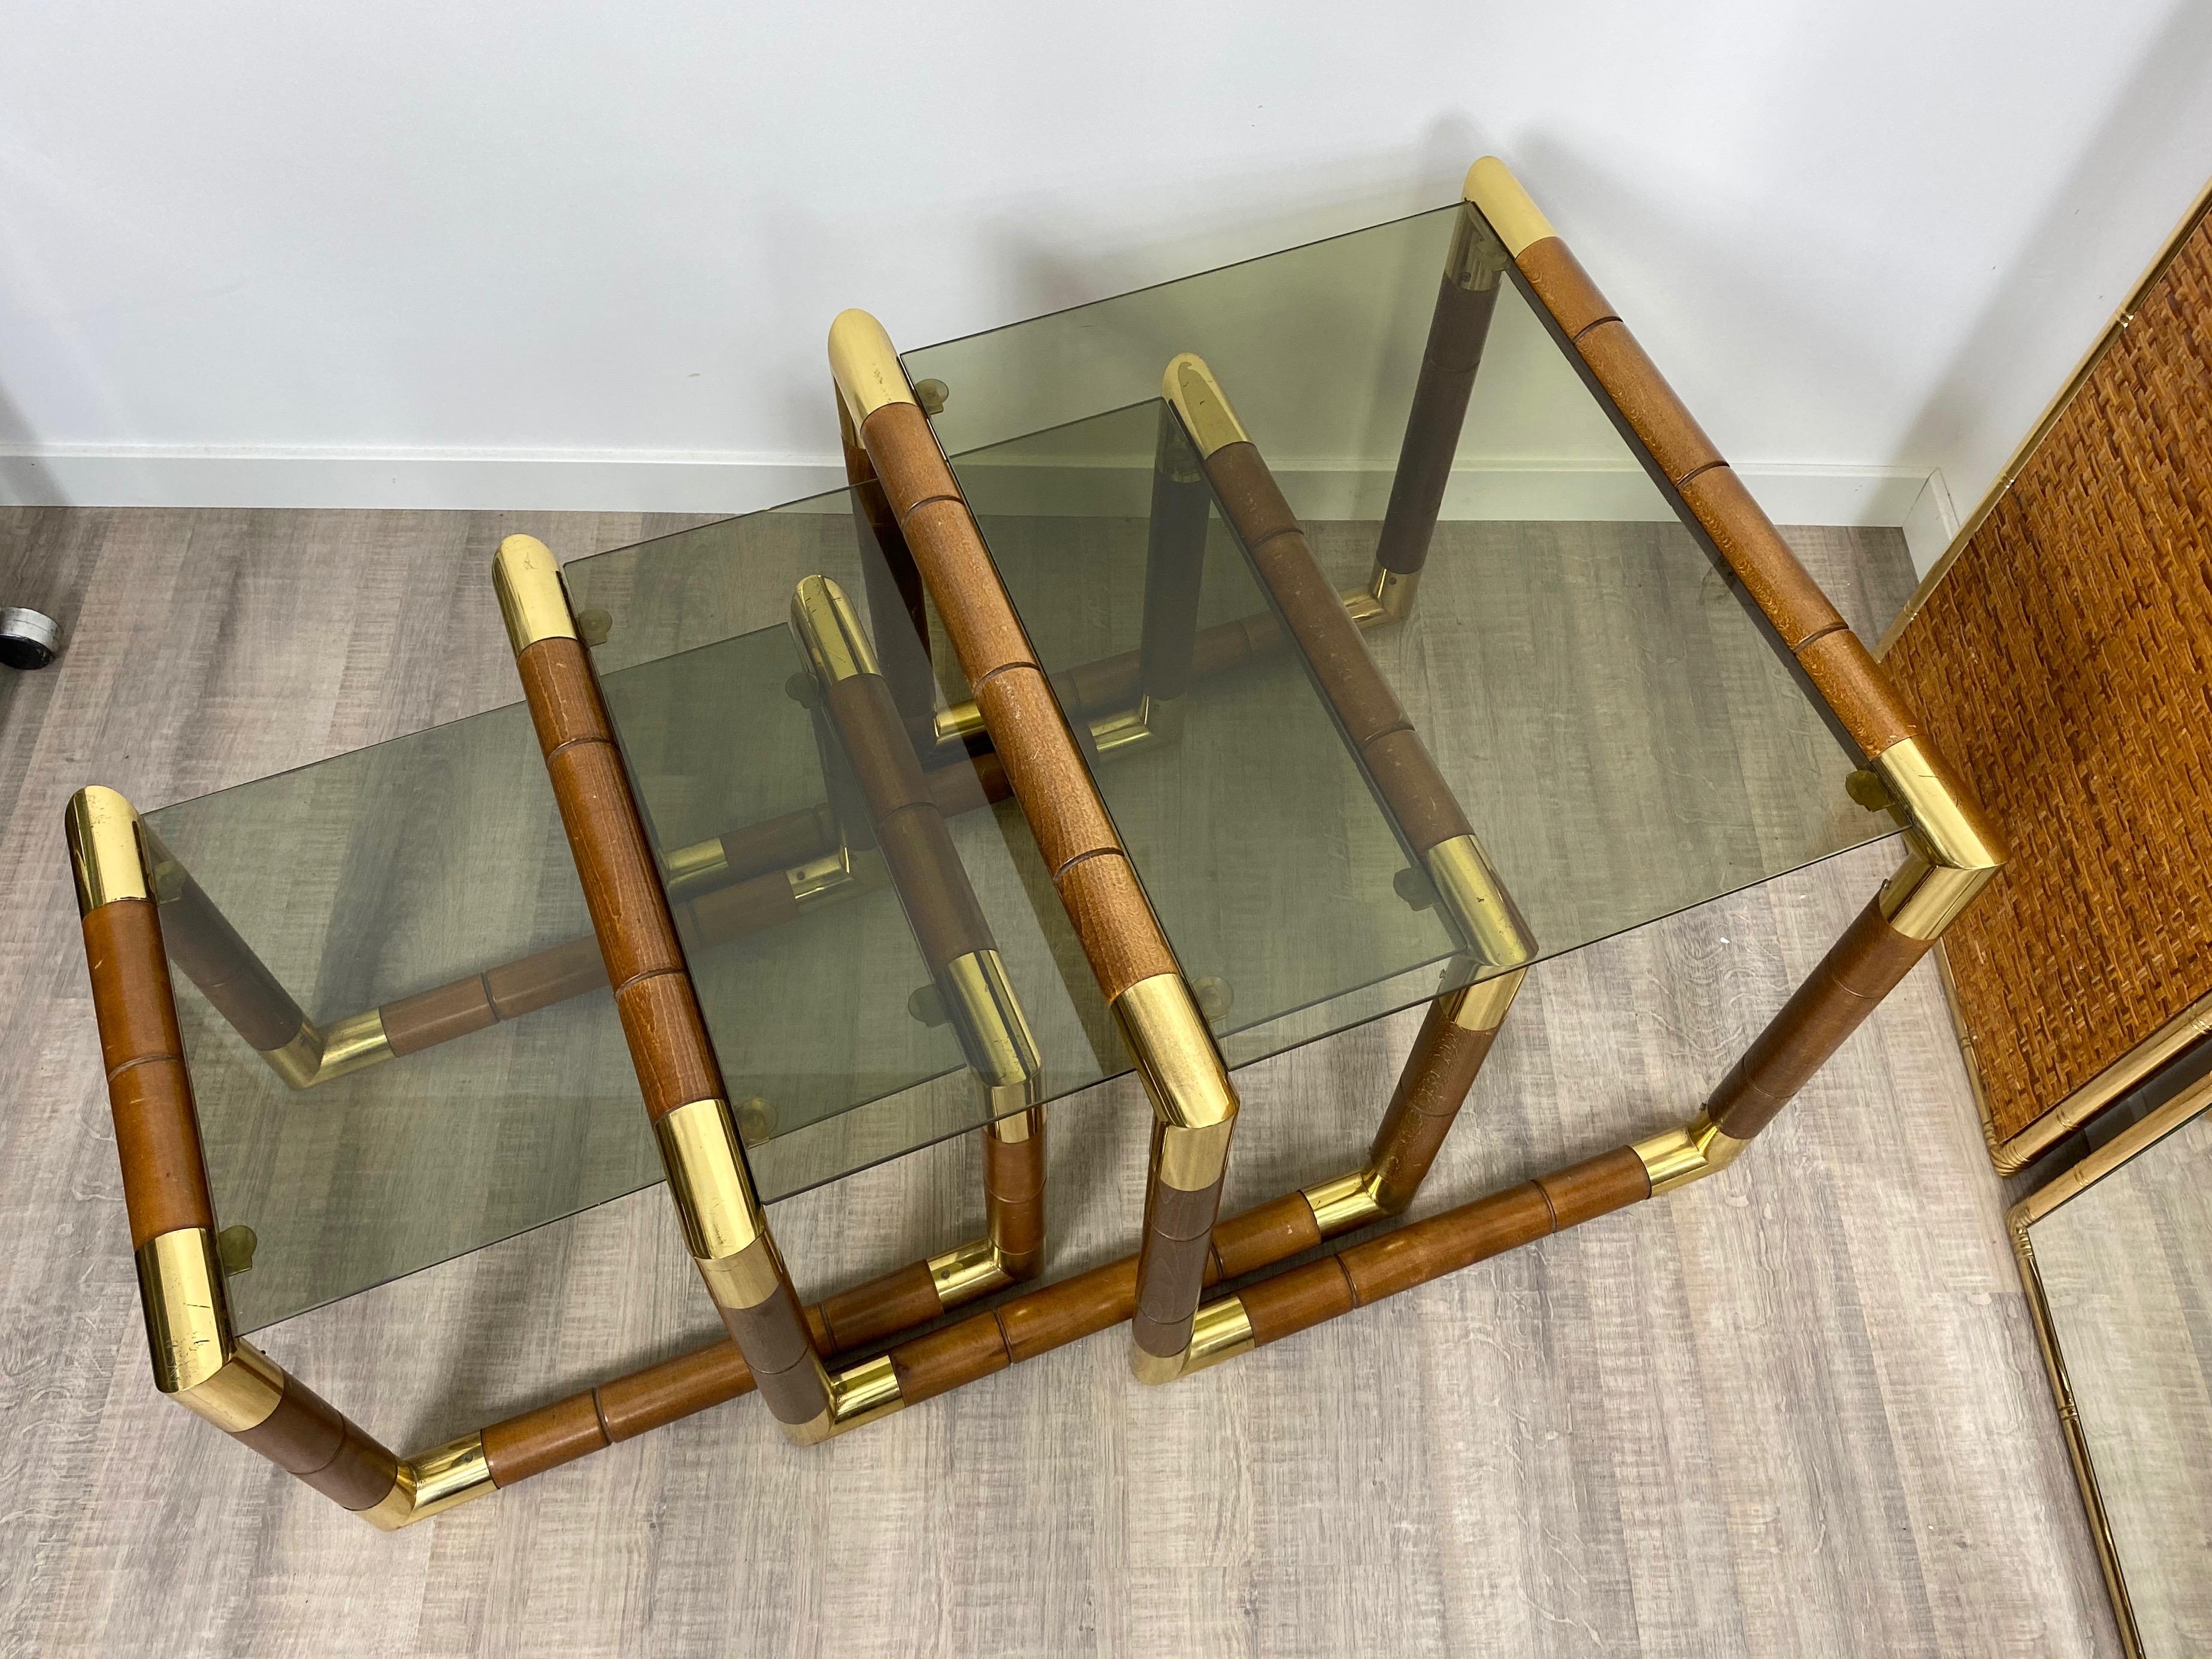 Set of Nesting Table in Wood, Brass and Glass, Italy, 1970s For Sale 4